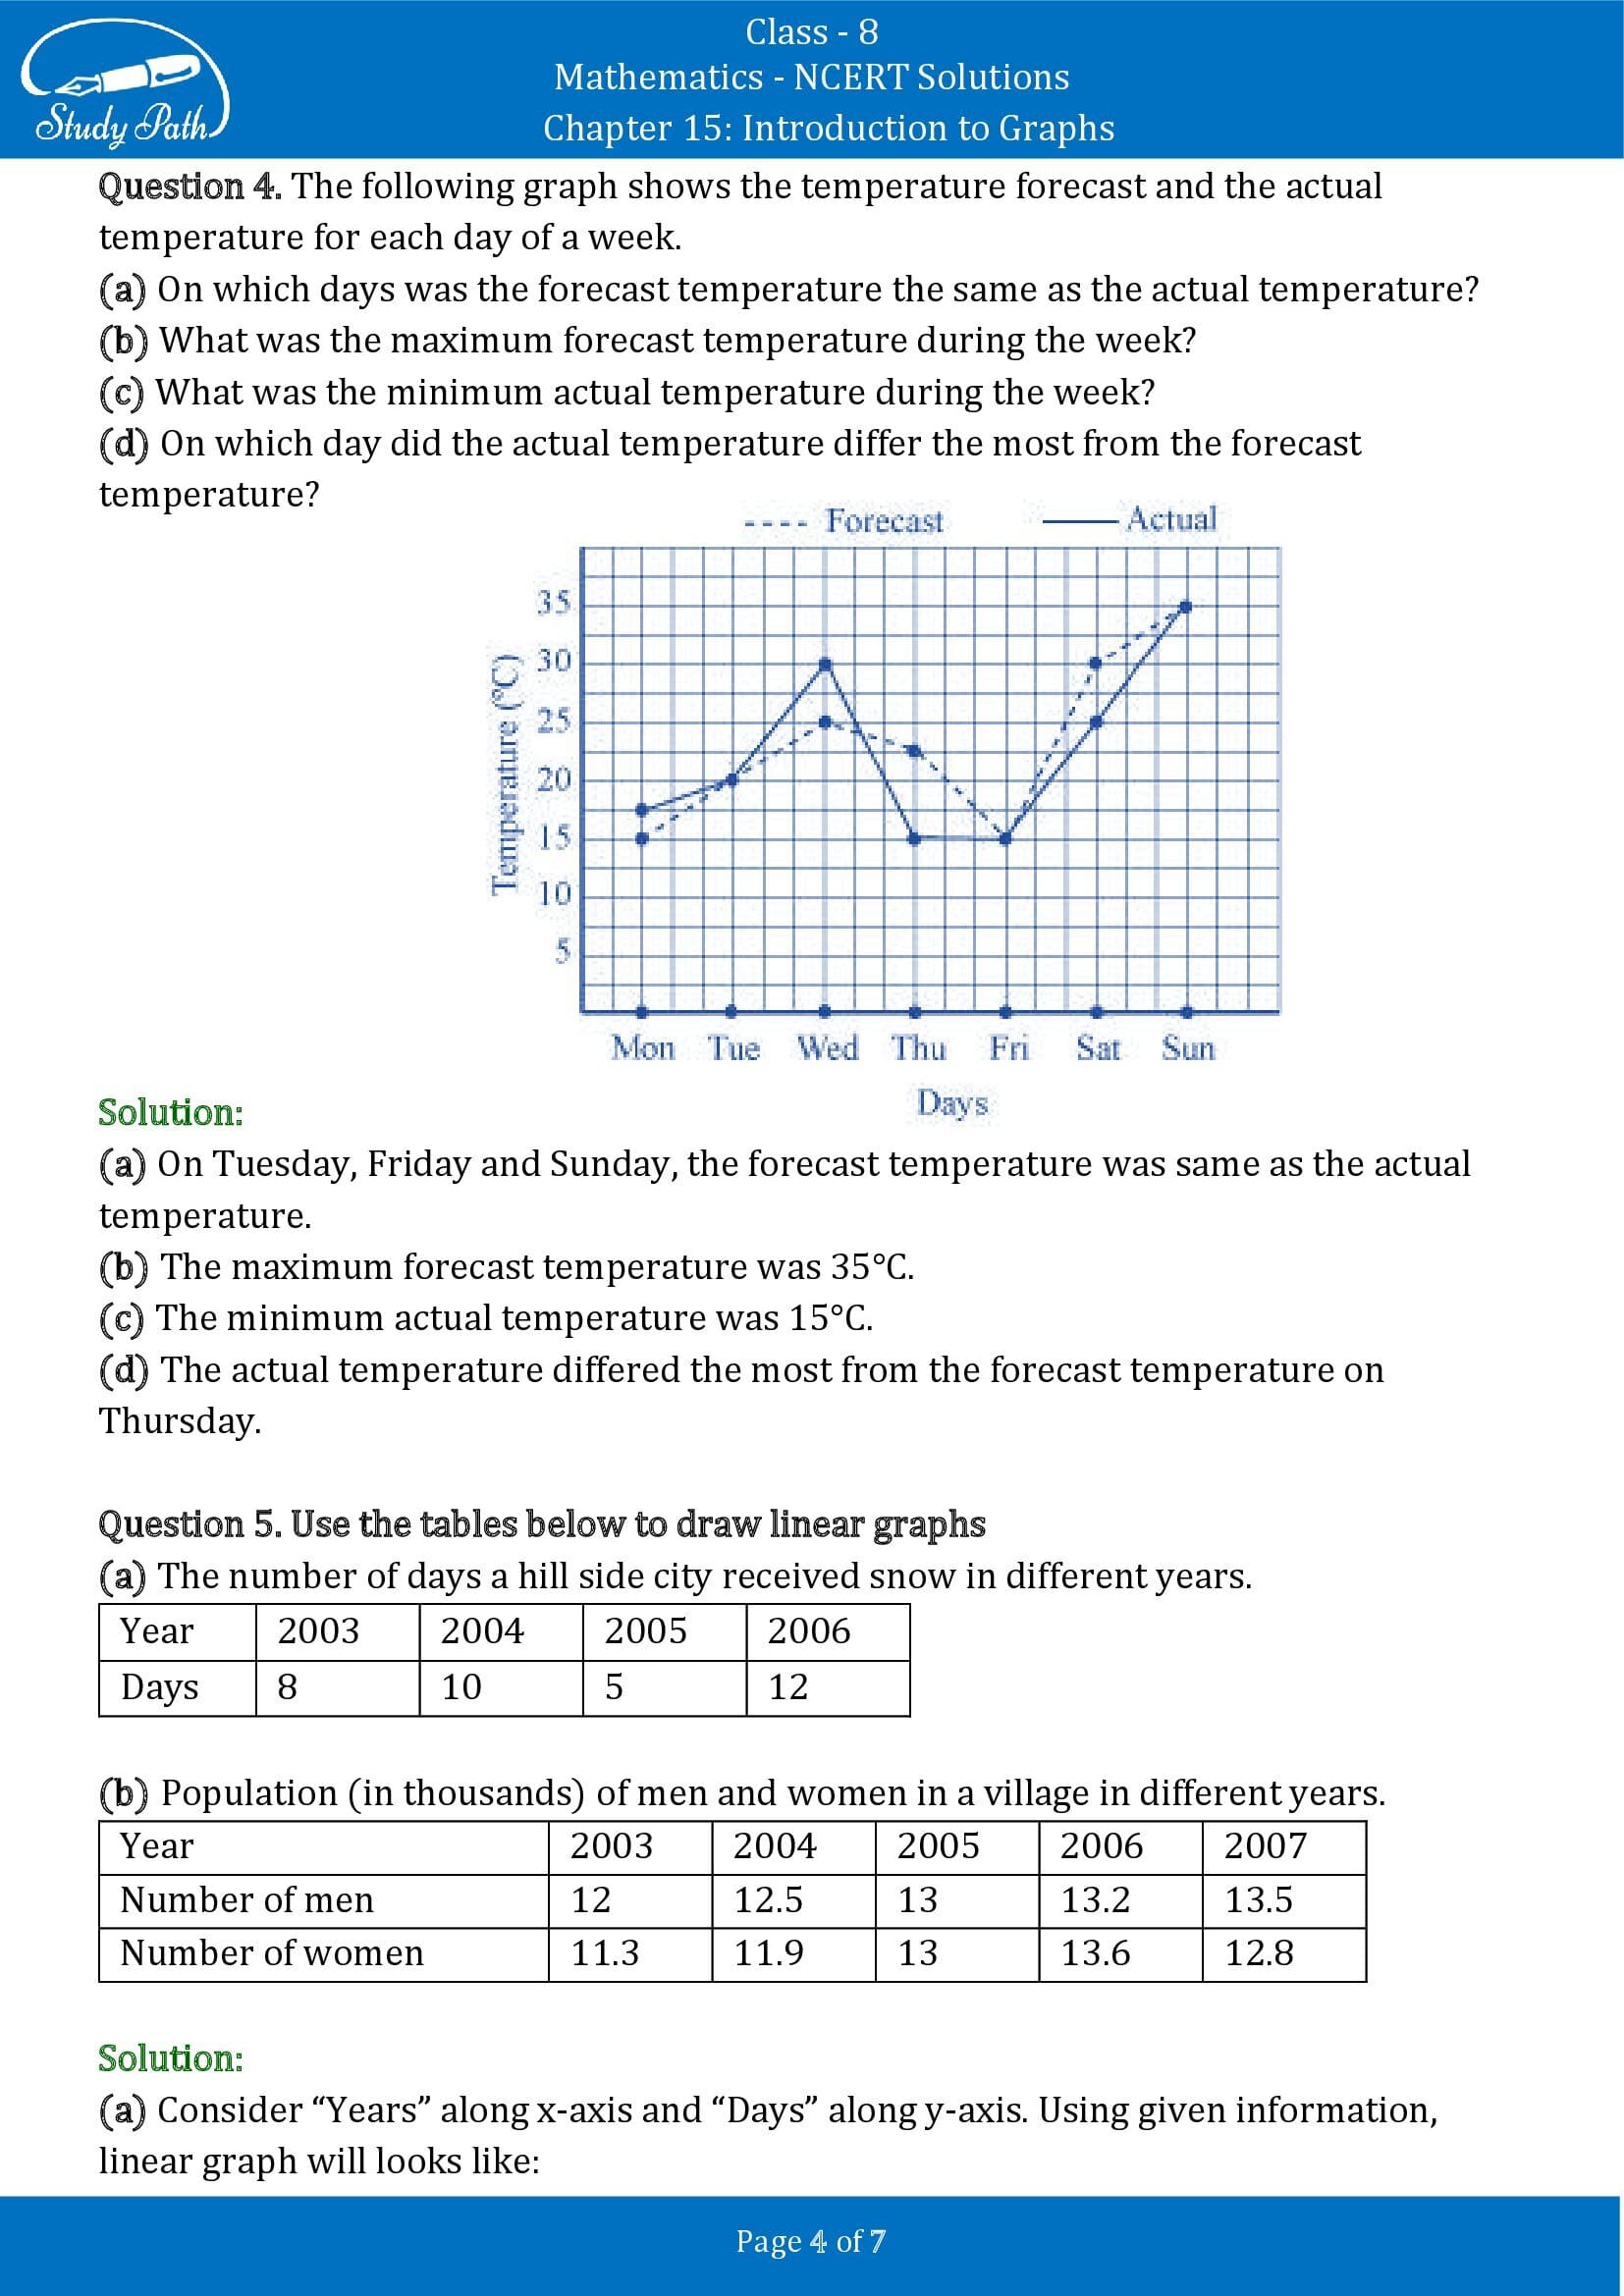 NCERT Solutions for Class 8 Maths Chapter 15 Introduction to Graphs Exercise 15.1 00004